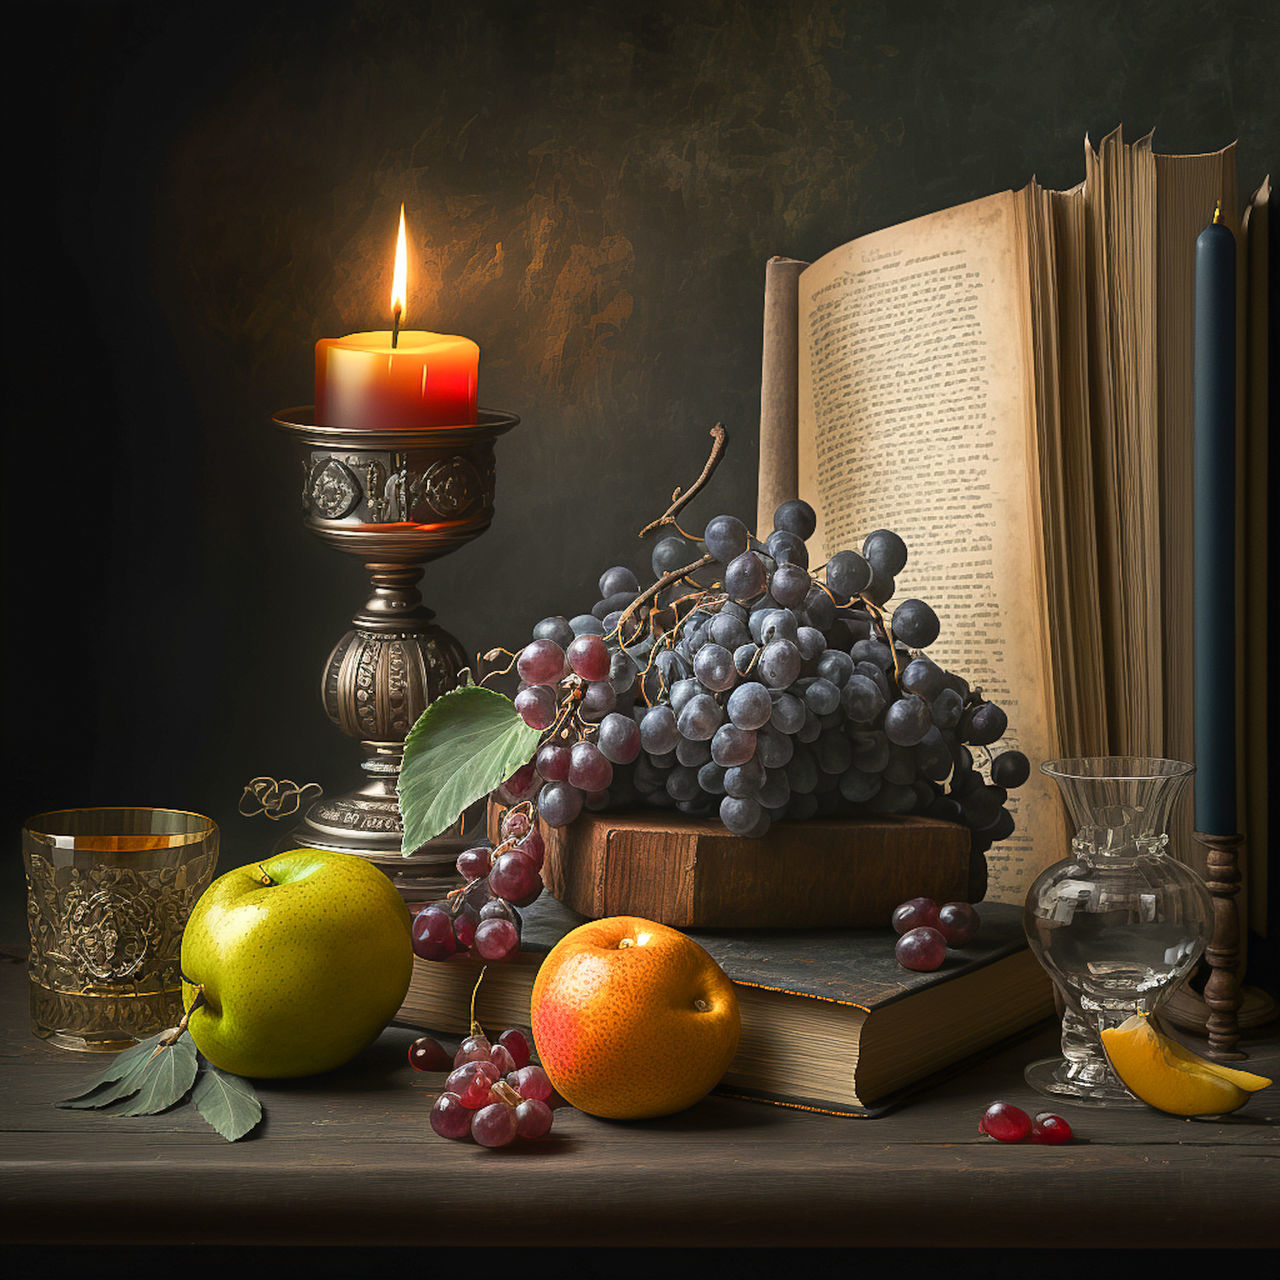 still life photography, still life, candle, fruit, painting, food and drink, food, healthy eating, indoors, table, lighting, no people, burning, apple, wellbeing, nature, grape, apple - fruit, fire, citrus fruit, interior design, celebration, studio shot, yellow, flame, black background, decoration, freshness, holiday, container, tradition